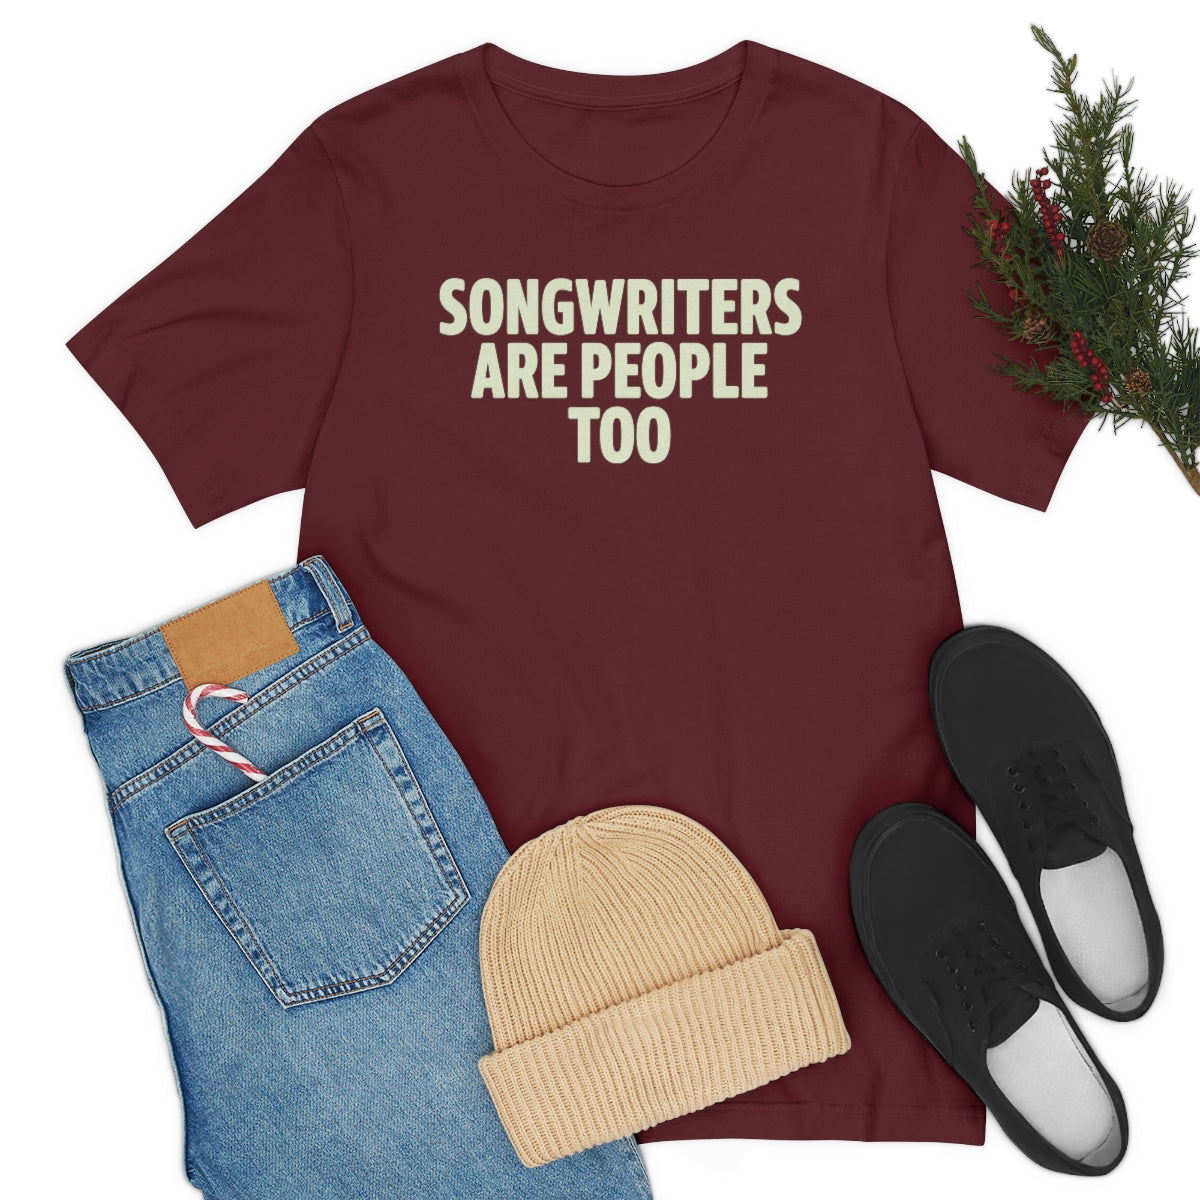 Songwriters are people too